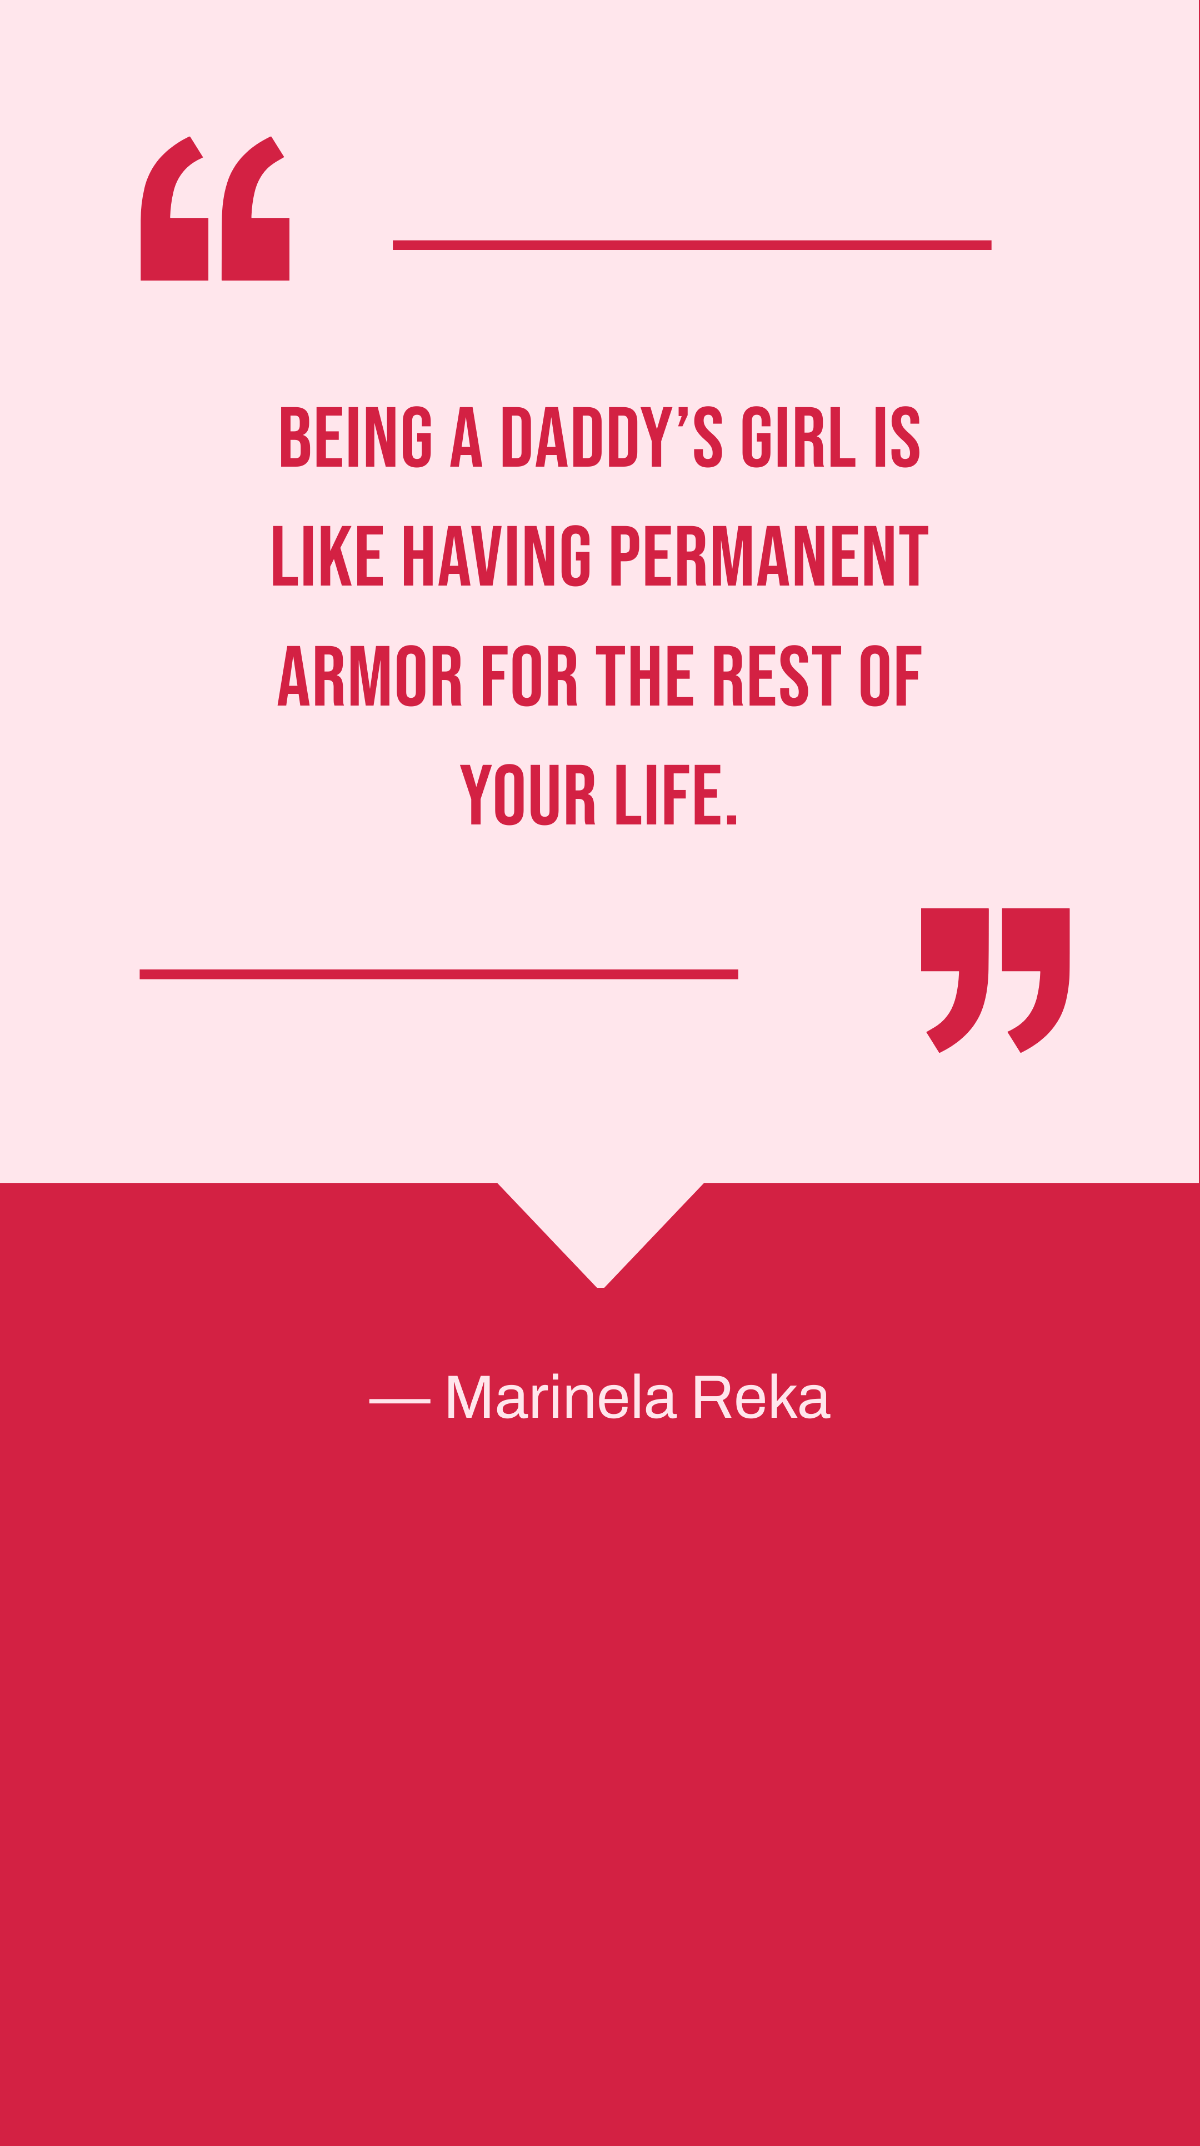 Marinela Reka - Being a daddy’s girl is like having permanent armor for the rest of your life. Template